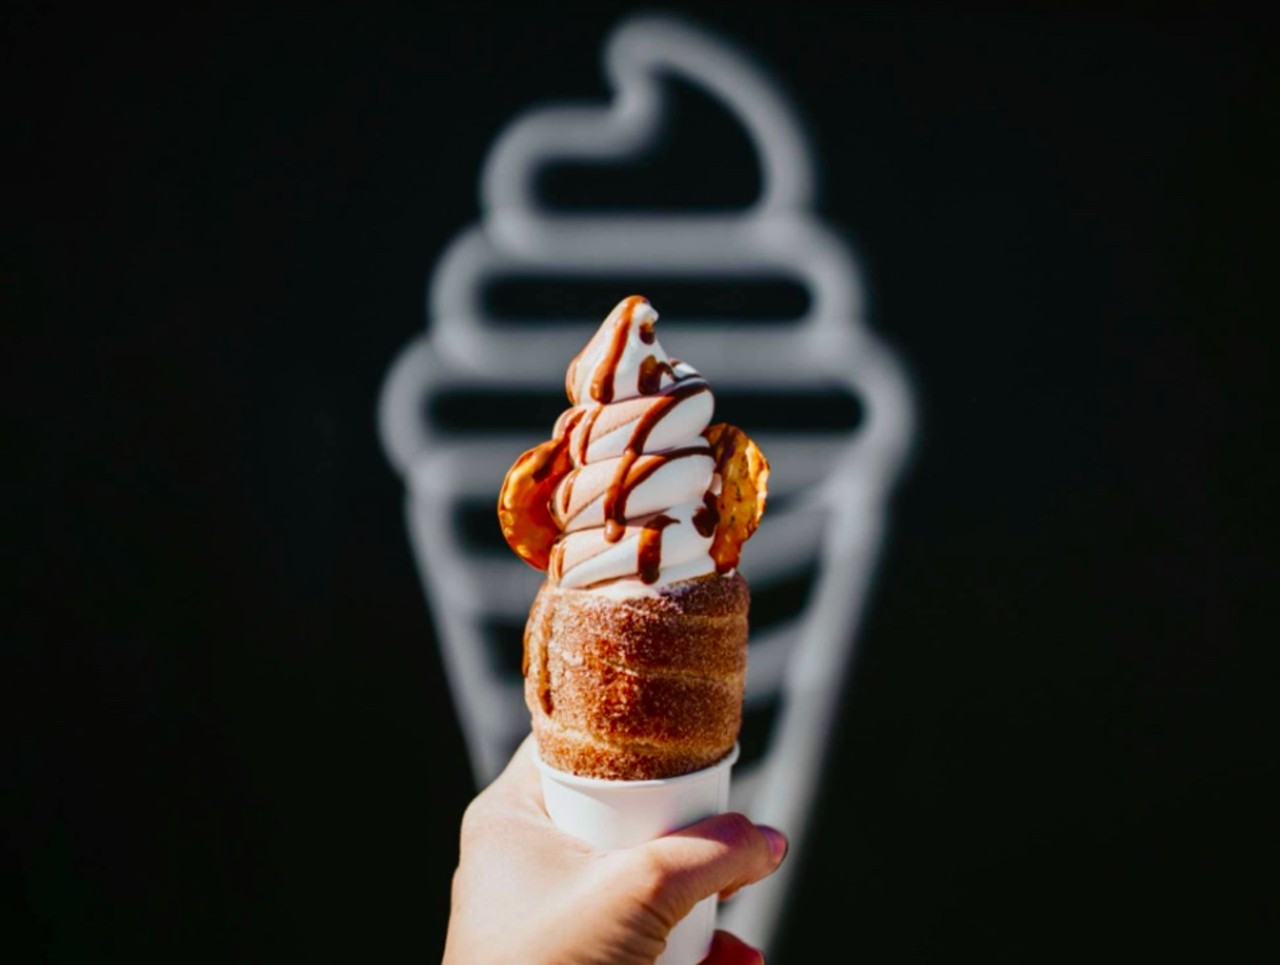 Crispy Cones
TBA
The Orlando ice cream game is about to get a European twist. Crispy Cones, an Idaho-based soft-serve concept, is set to open its first Florida location right here in Orlando.The company’s motto is “Revolutionizing the soft serve cone,” and according to its website, Crispy Cones is doing just that with its freshly grilled dough cones, filled with premium soft-serve ice cream and toppings.